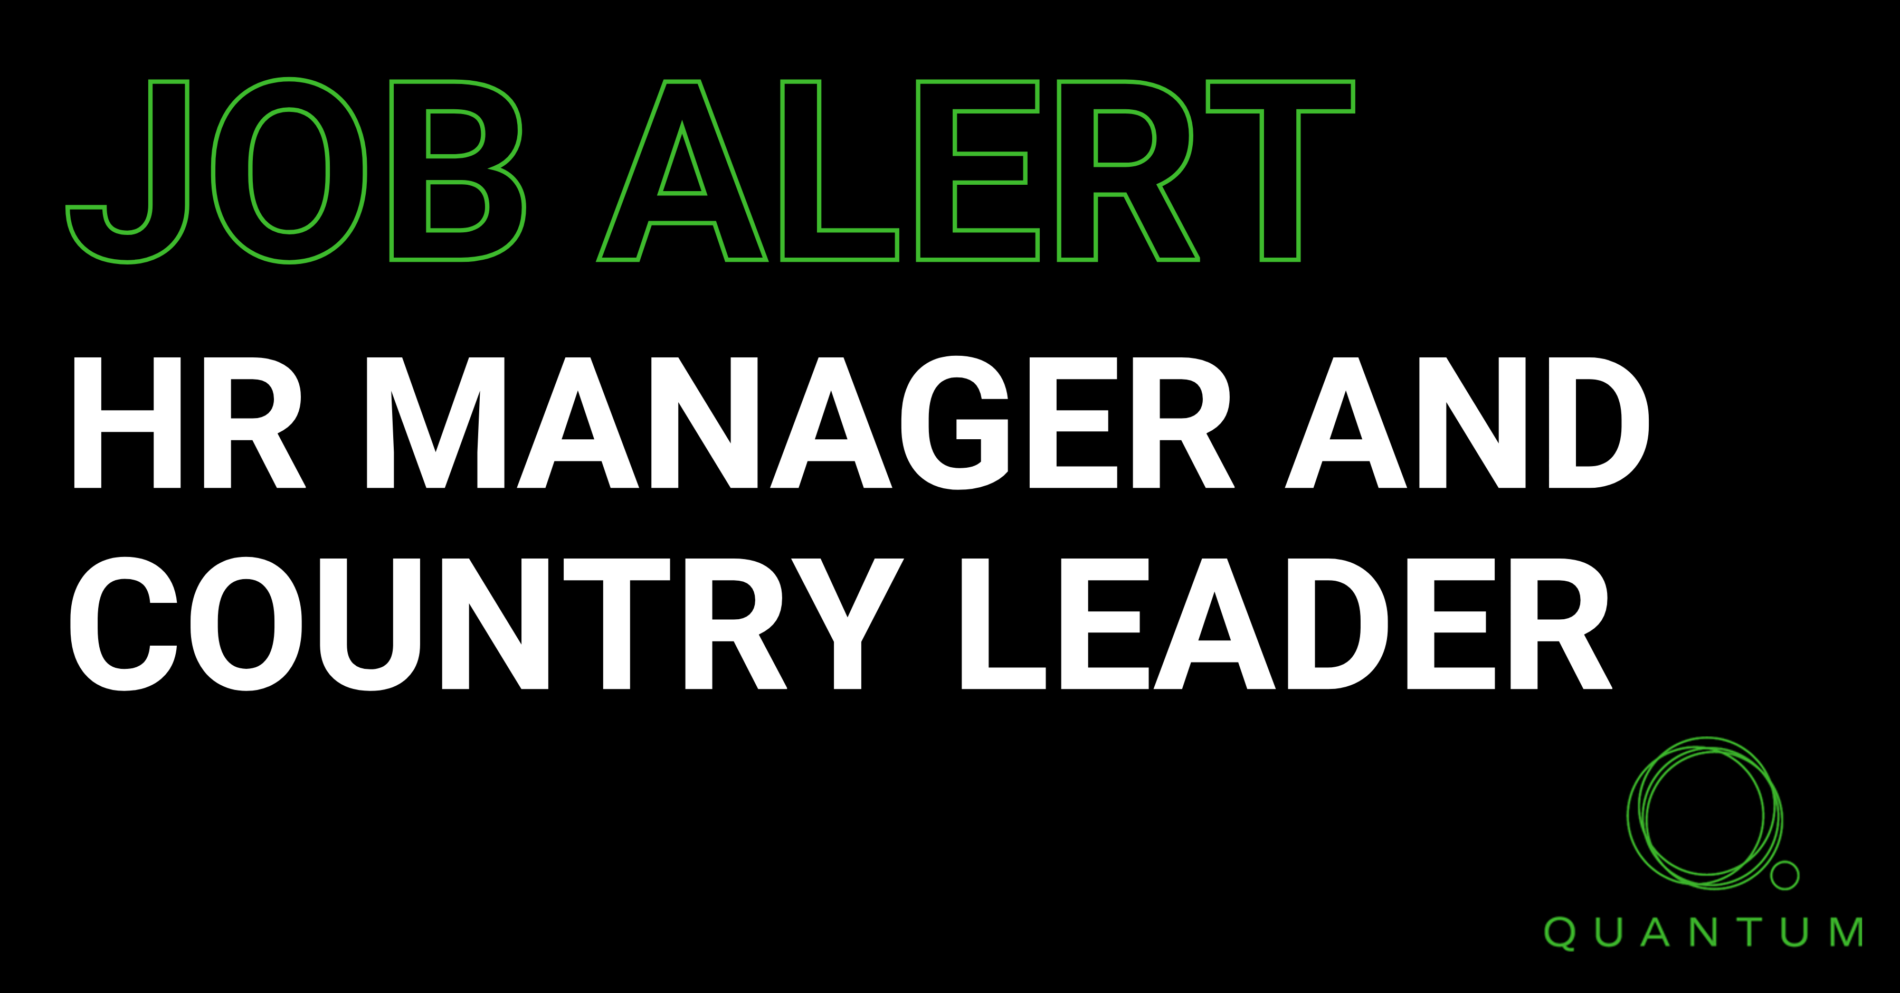 Job Alert. HR Manager and Country Leader